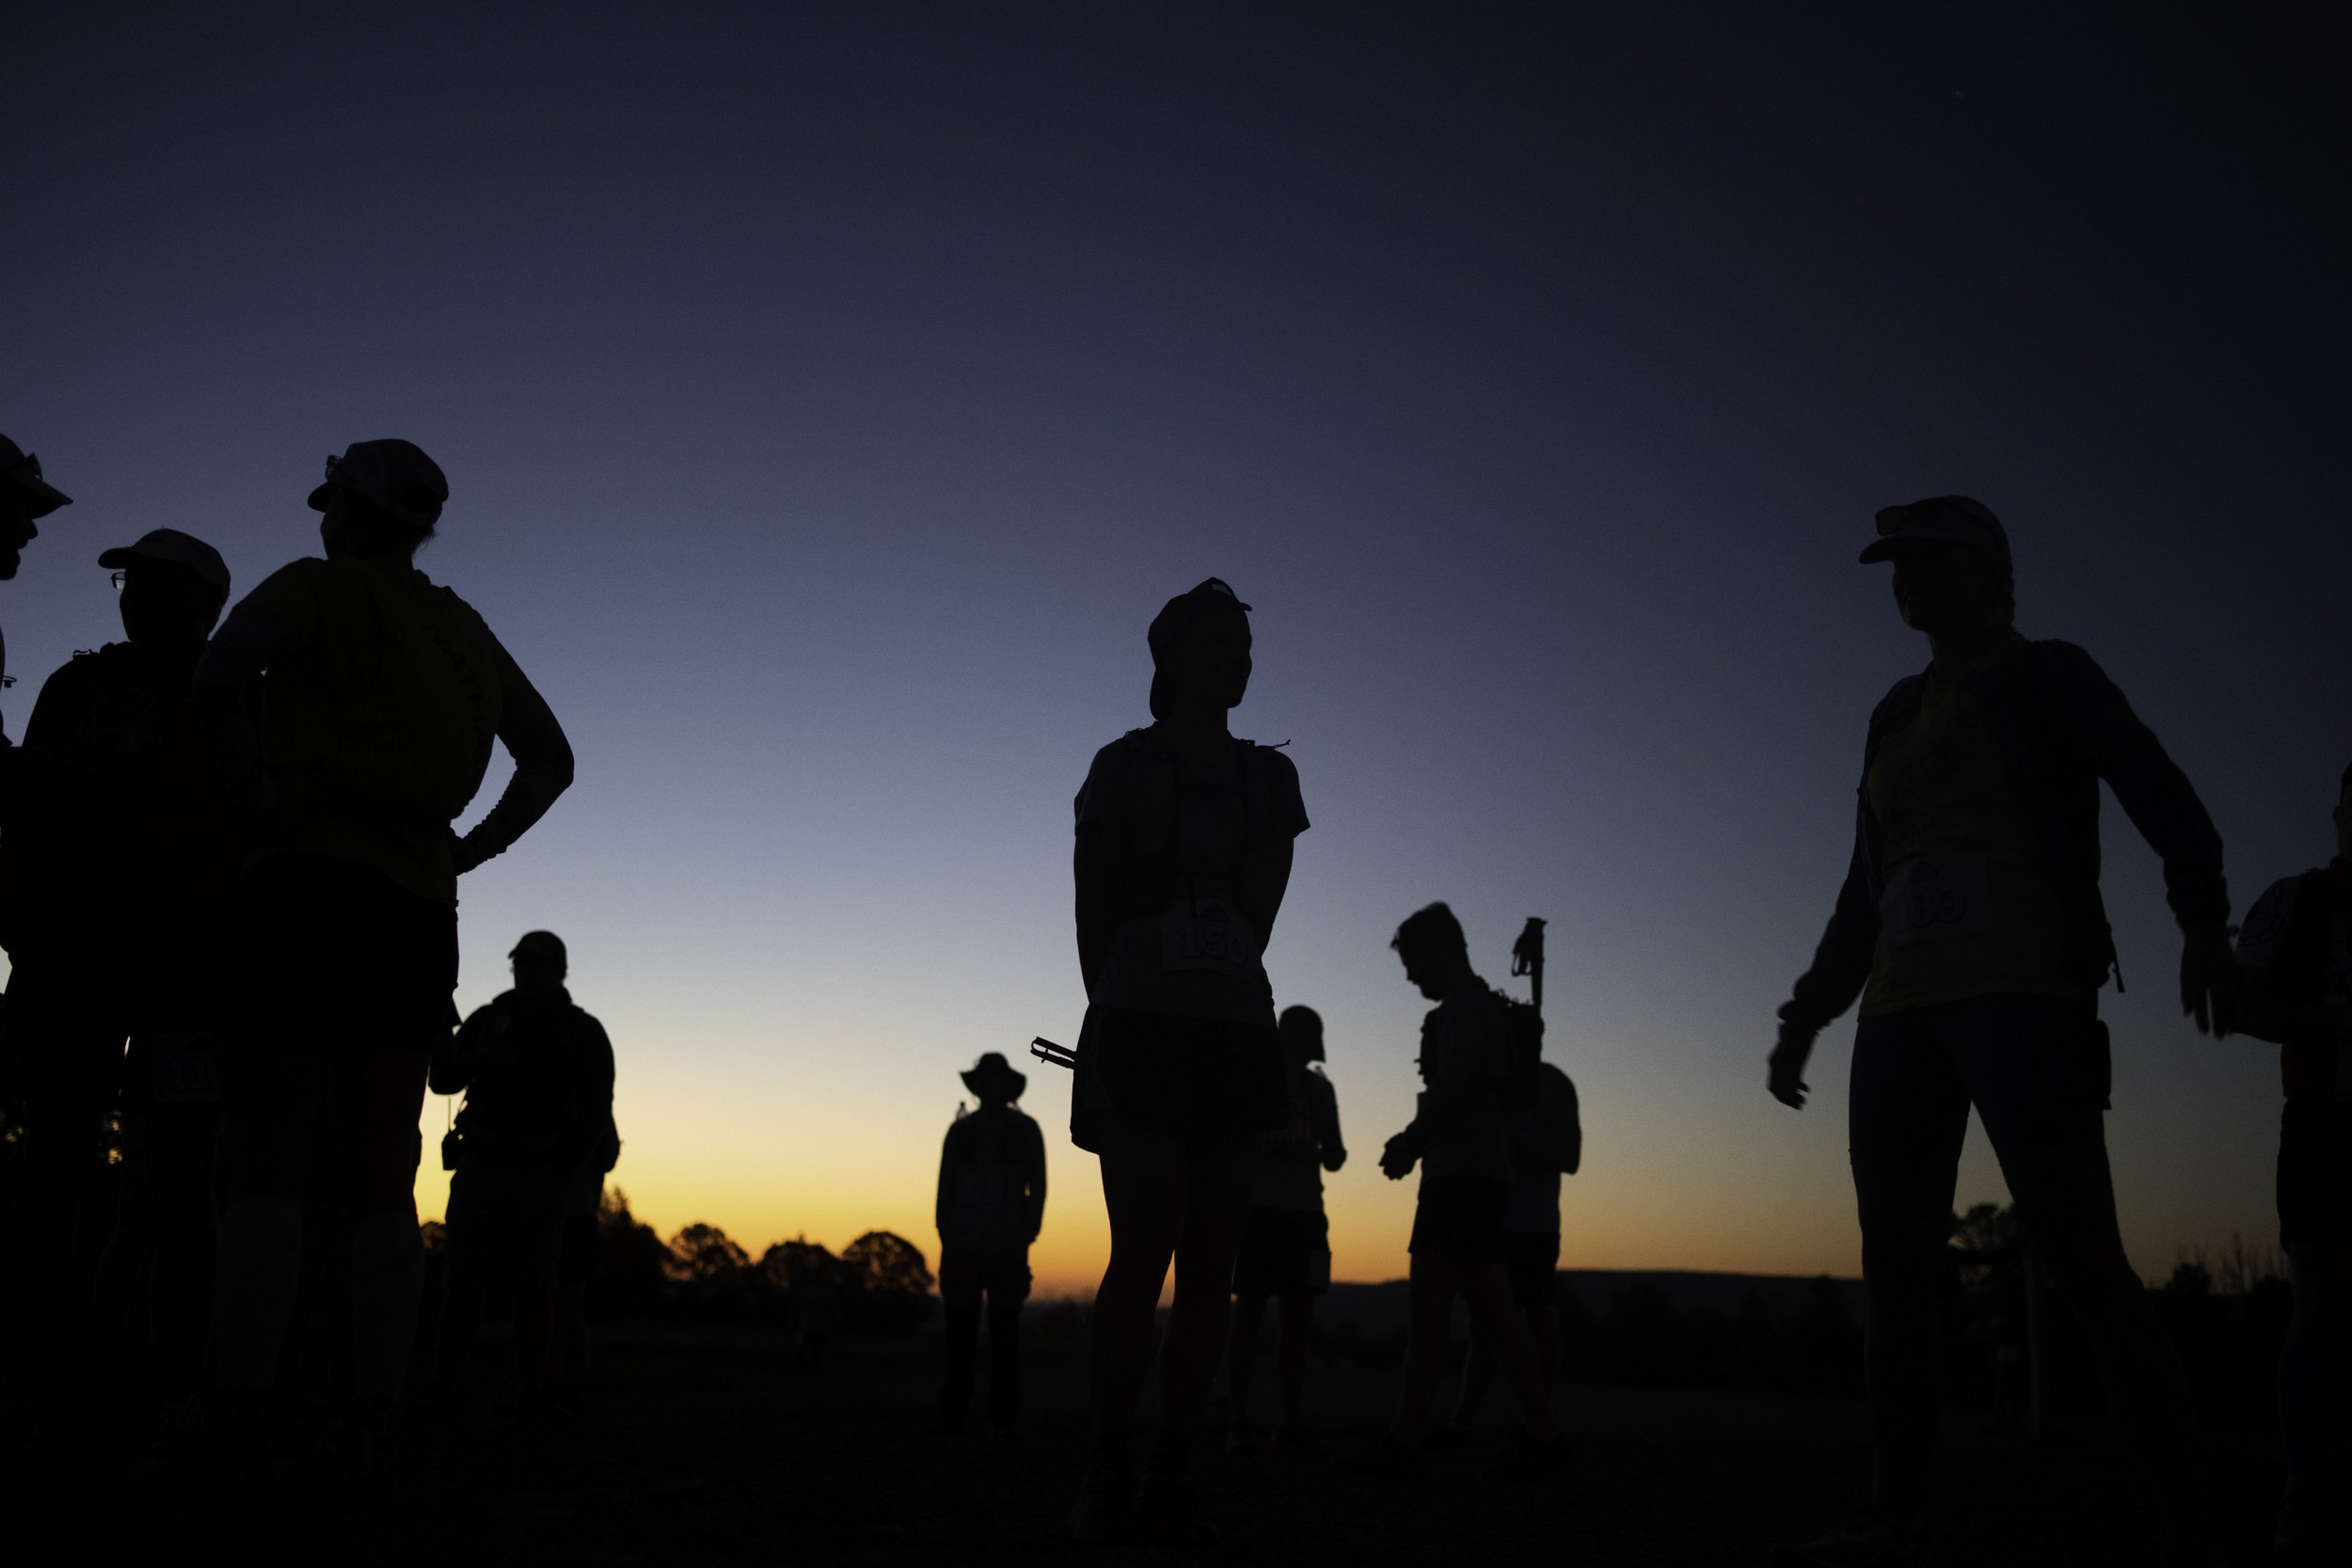  Racers stretch during sunrise before the marathon in the first annual Trail Race at Philmont Scout Ranch on Aug. 13, 2022, in Cimarron, N.M. Racers began their run at 7 am getting an early start before the mid-day heat.  